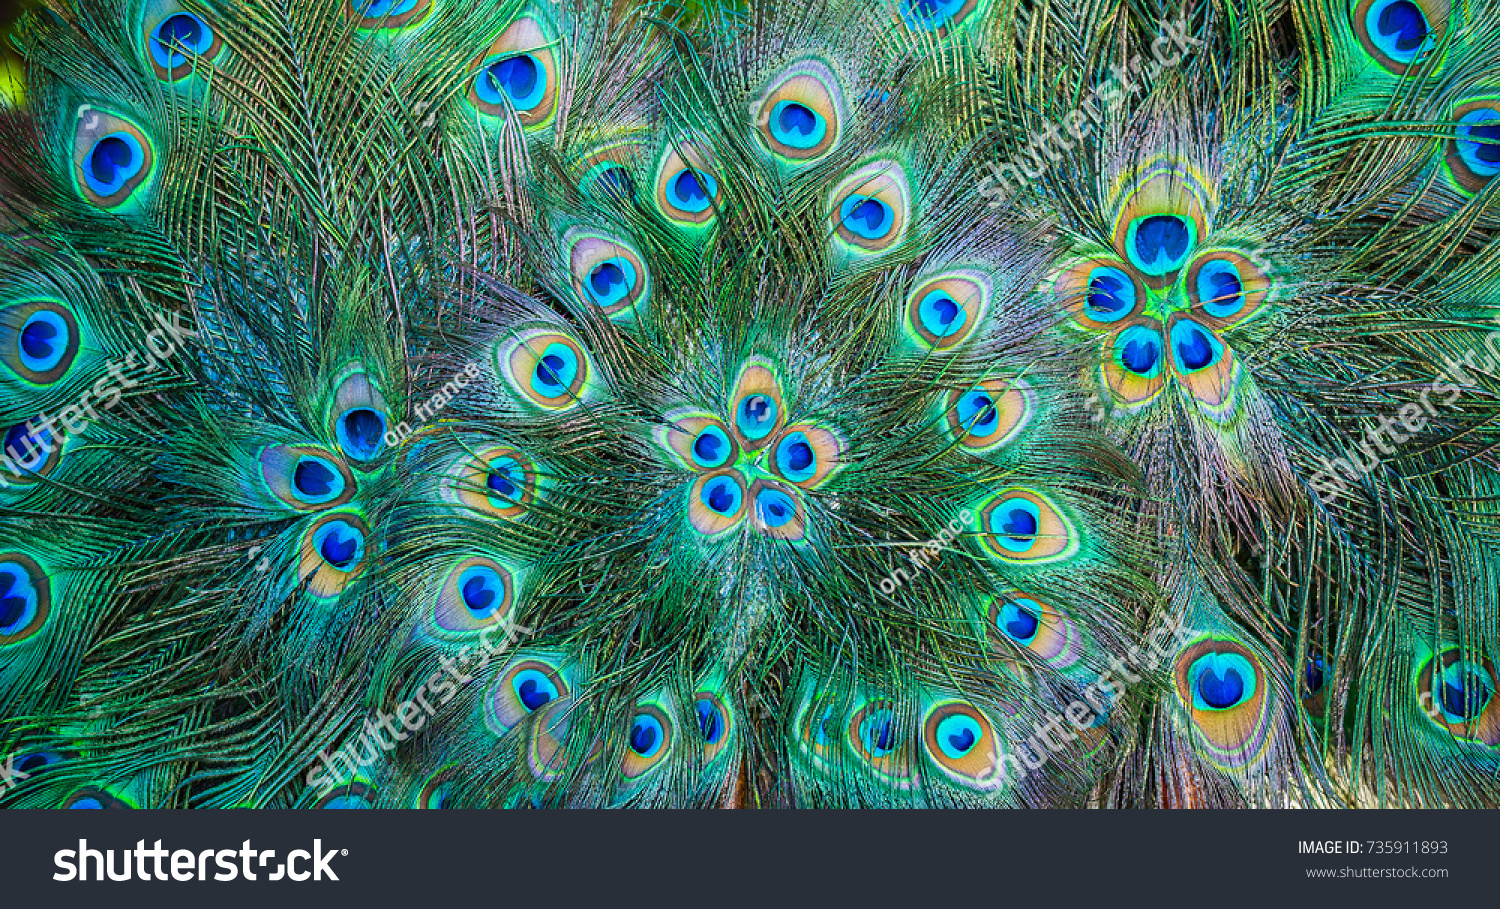 Beautiful exotic peacock feathers background. Peacock pattern green and blue.